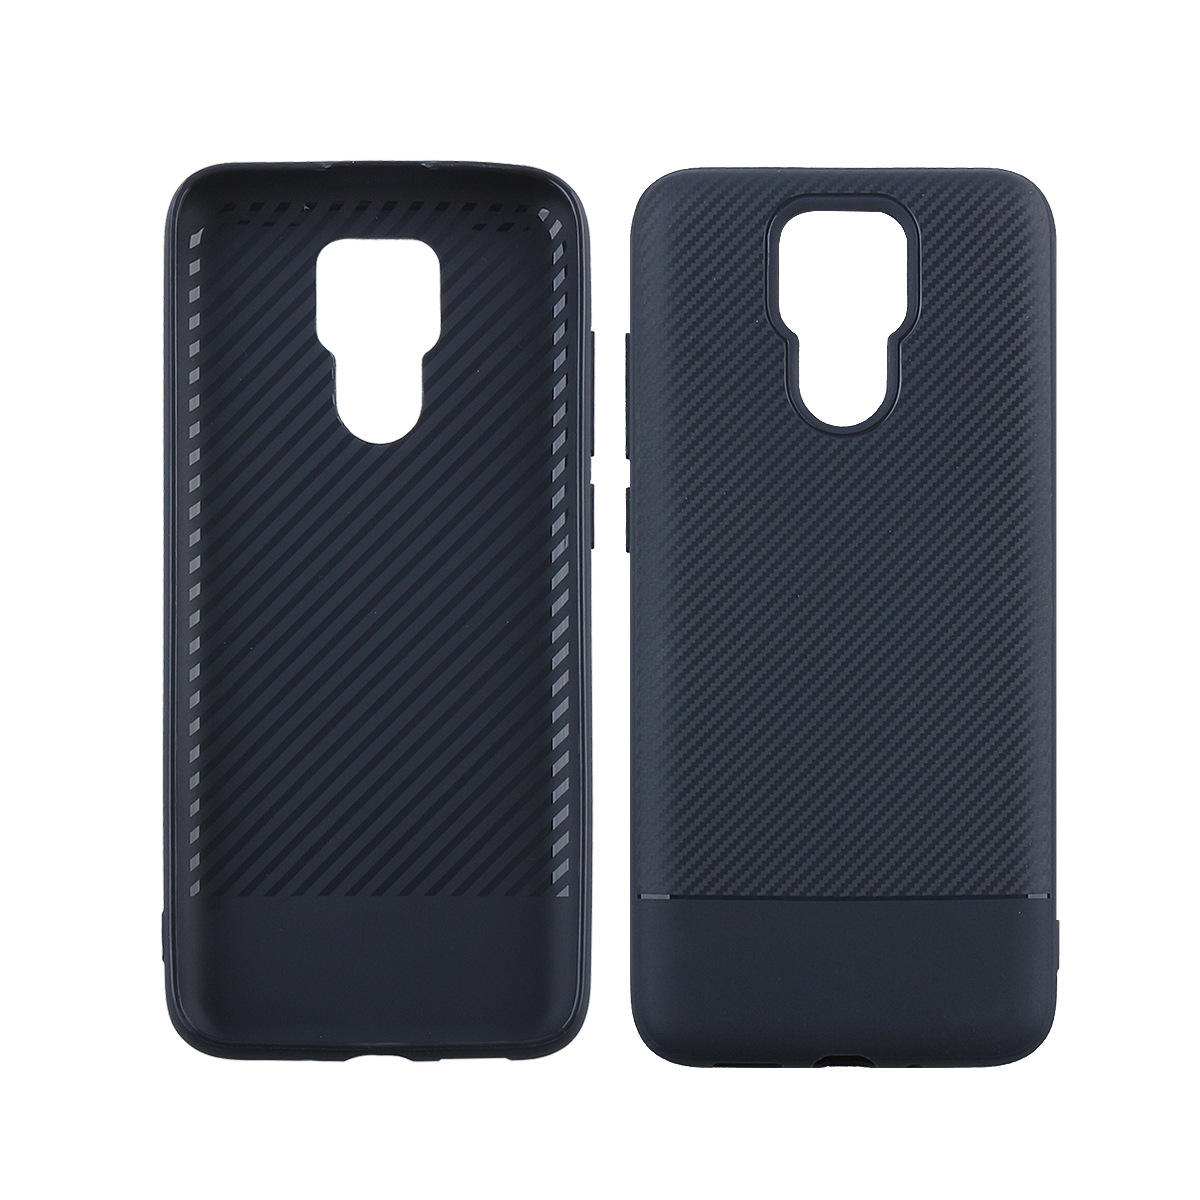 Bakeey Ultra-thin Shockproof Soft Silicone Protective Case For Ulefone Power 6